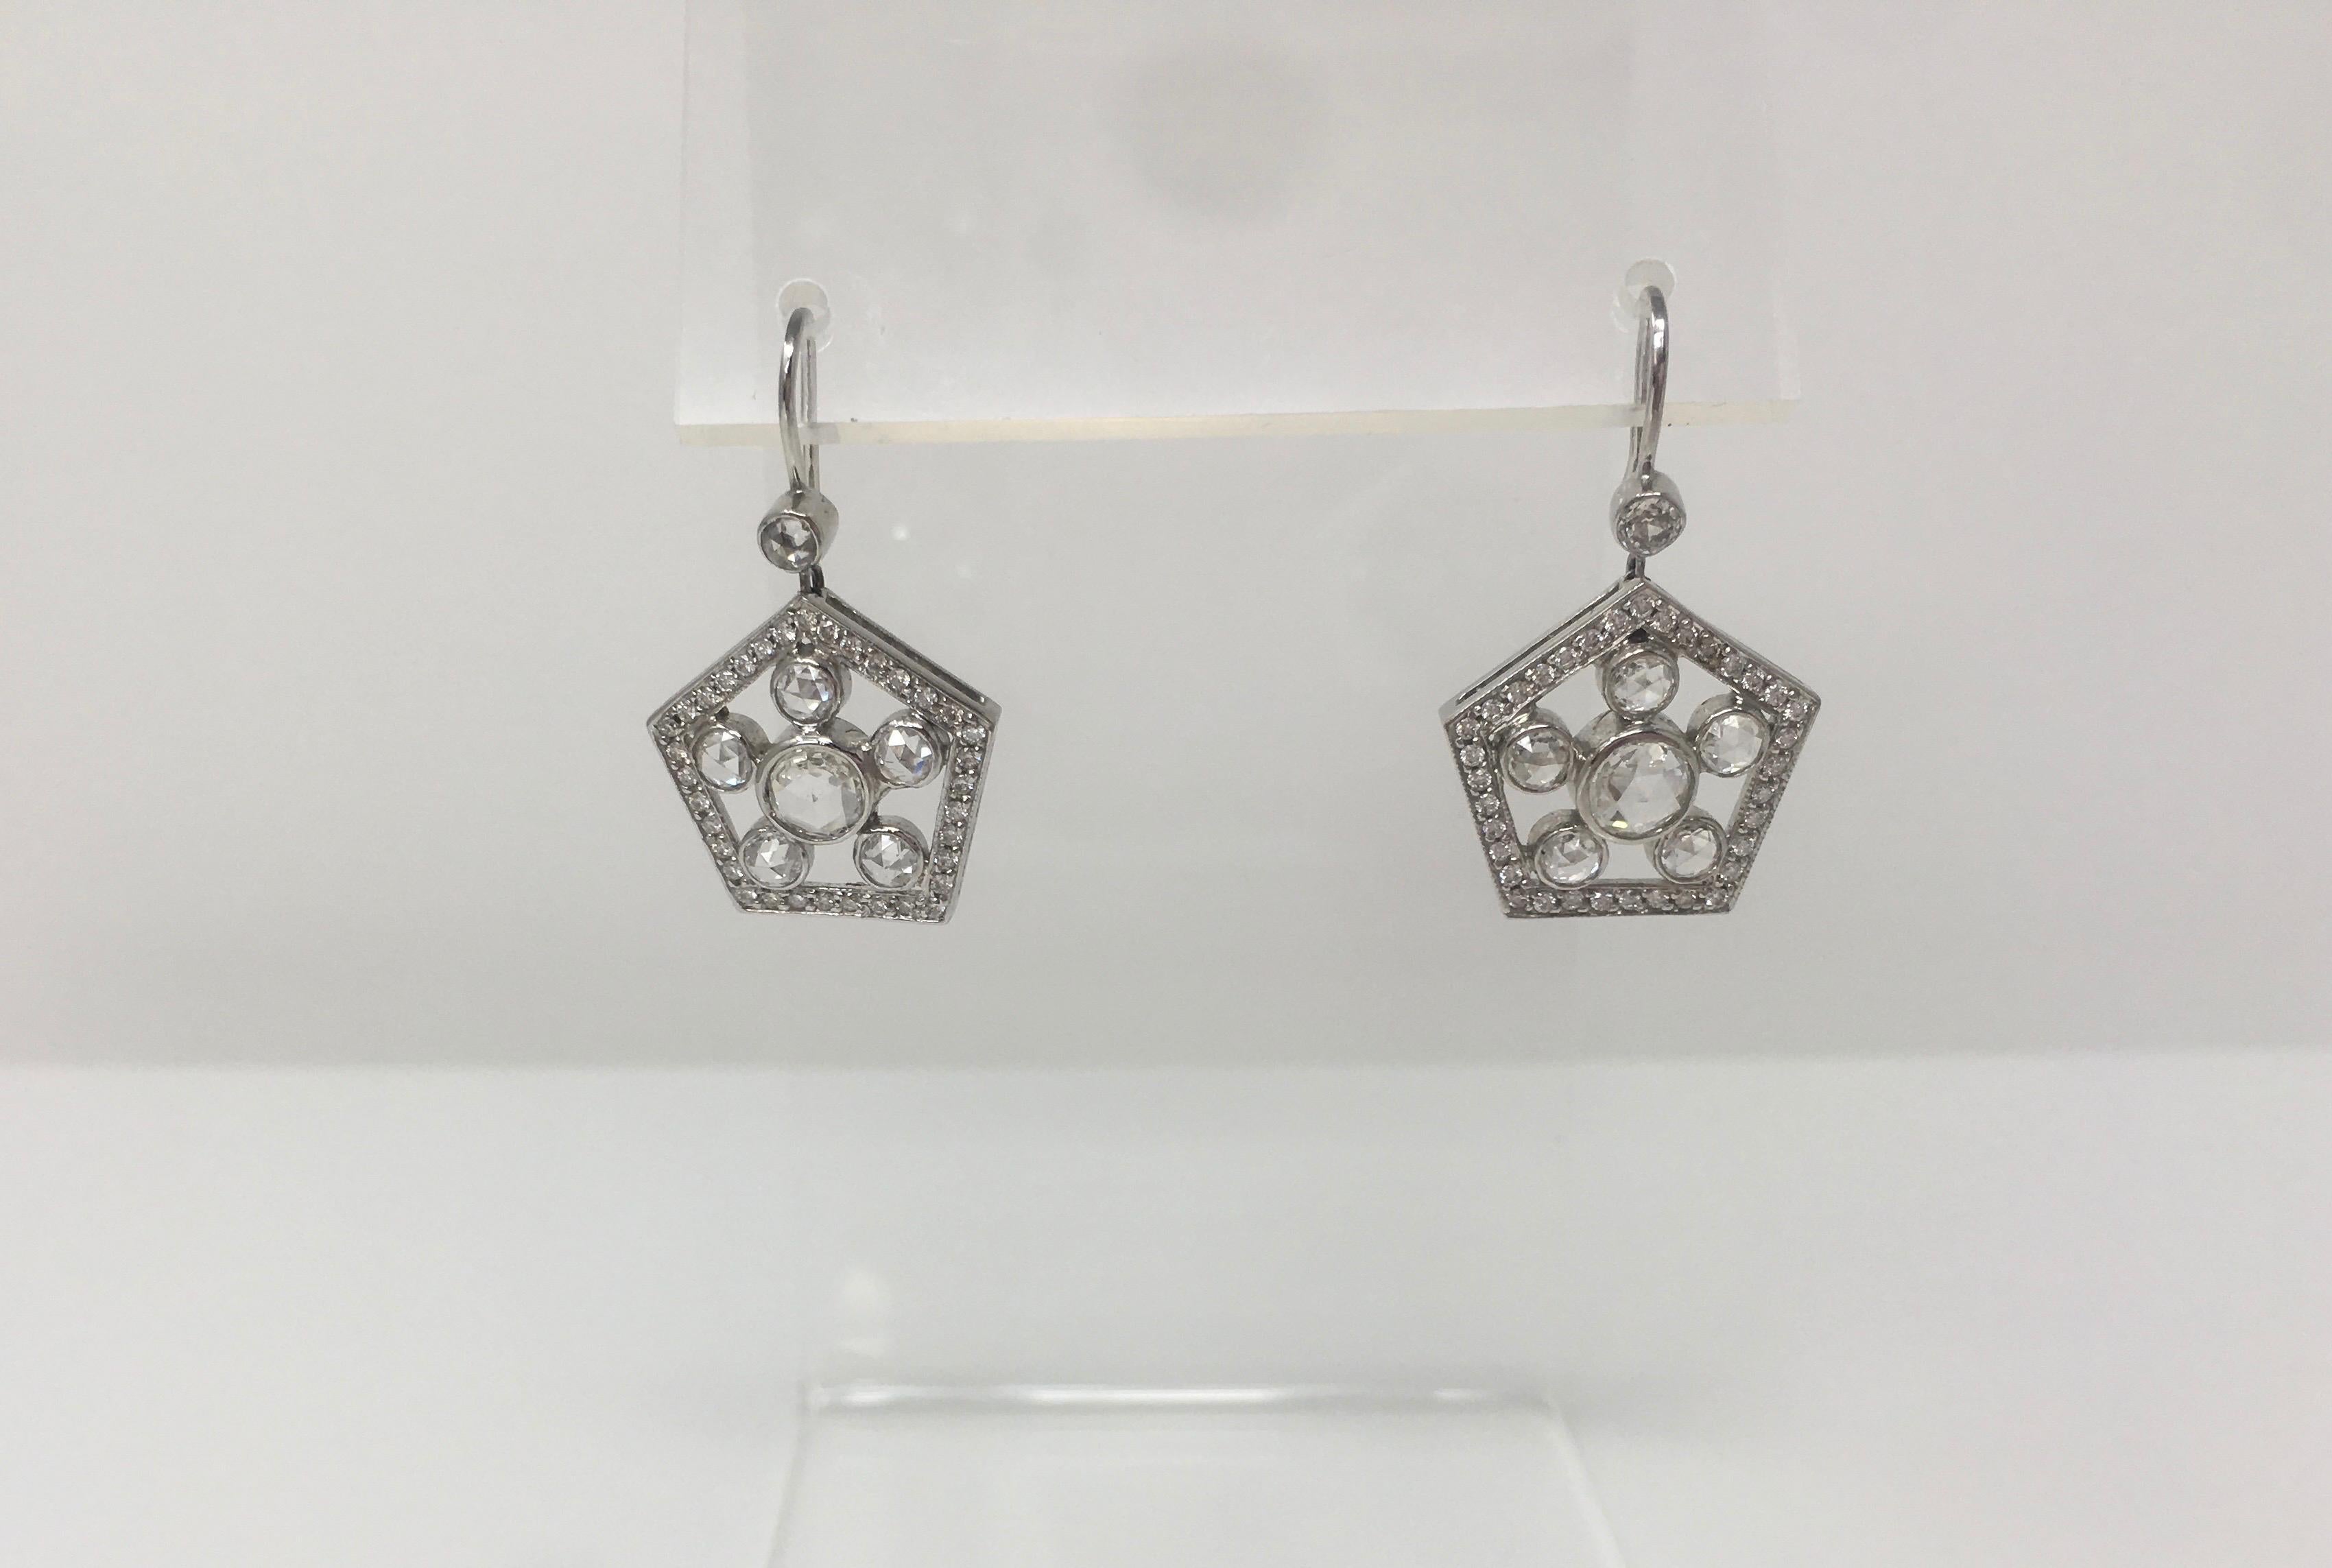 A unique pair of rose-cut diamond dangle earrings are classy and wearable. These earrings are set with a round rose cut diamond 0.60/2 in the center of the earrings with F G color and VS clarity surrounded by 5 smaller round rose cut diamonds total